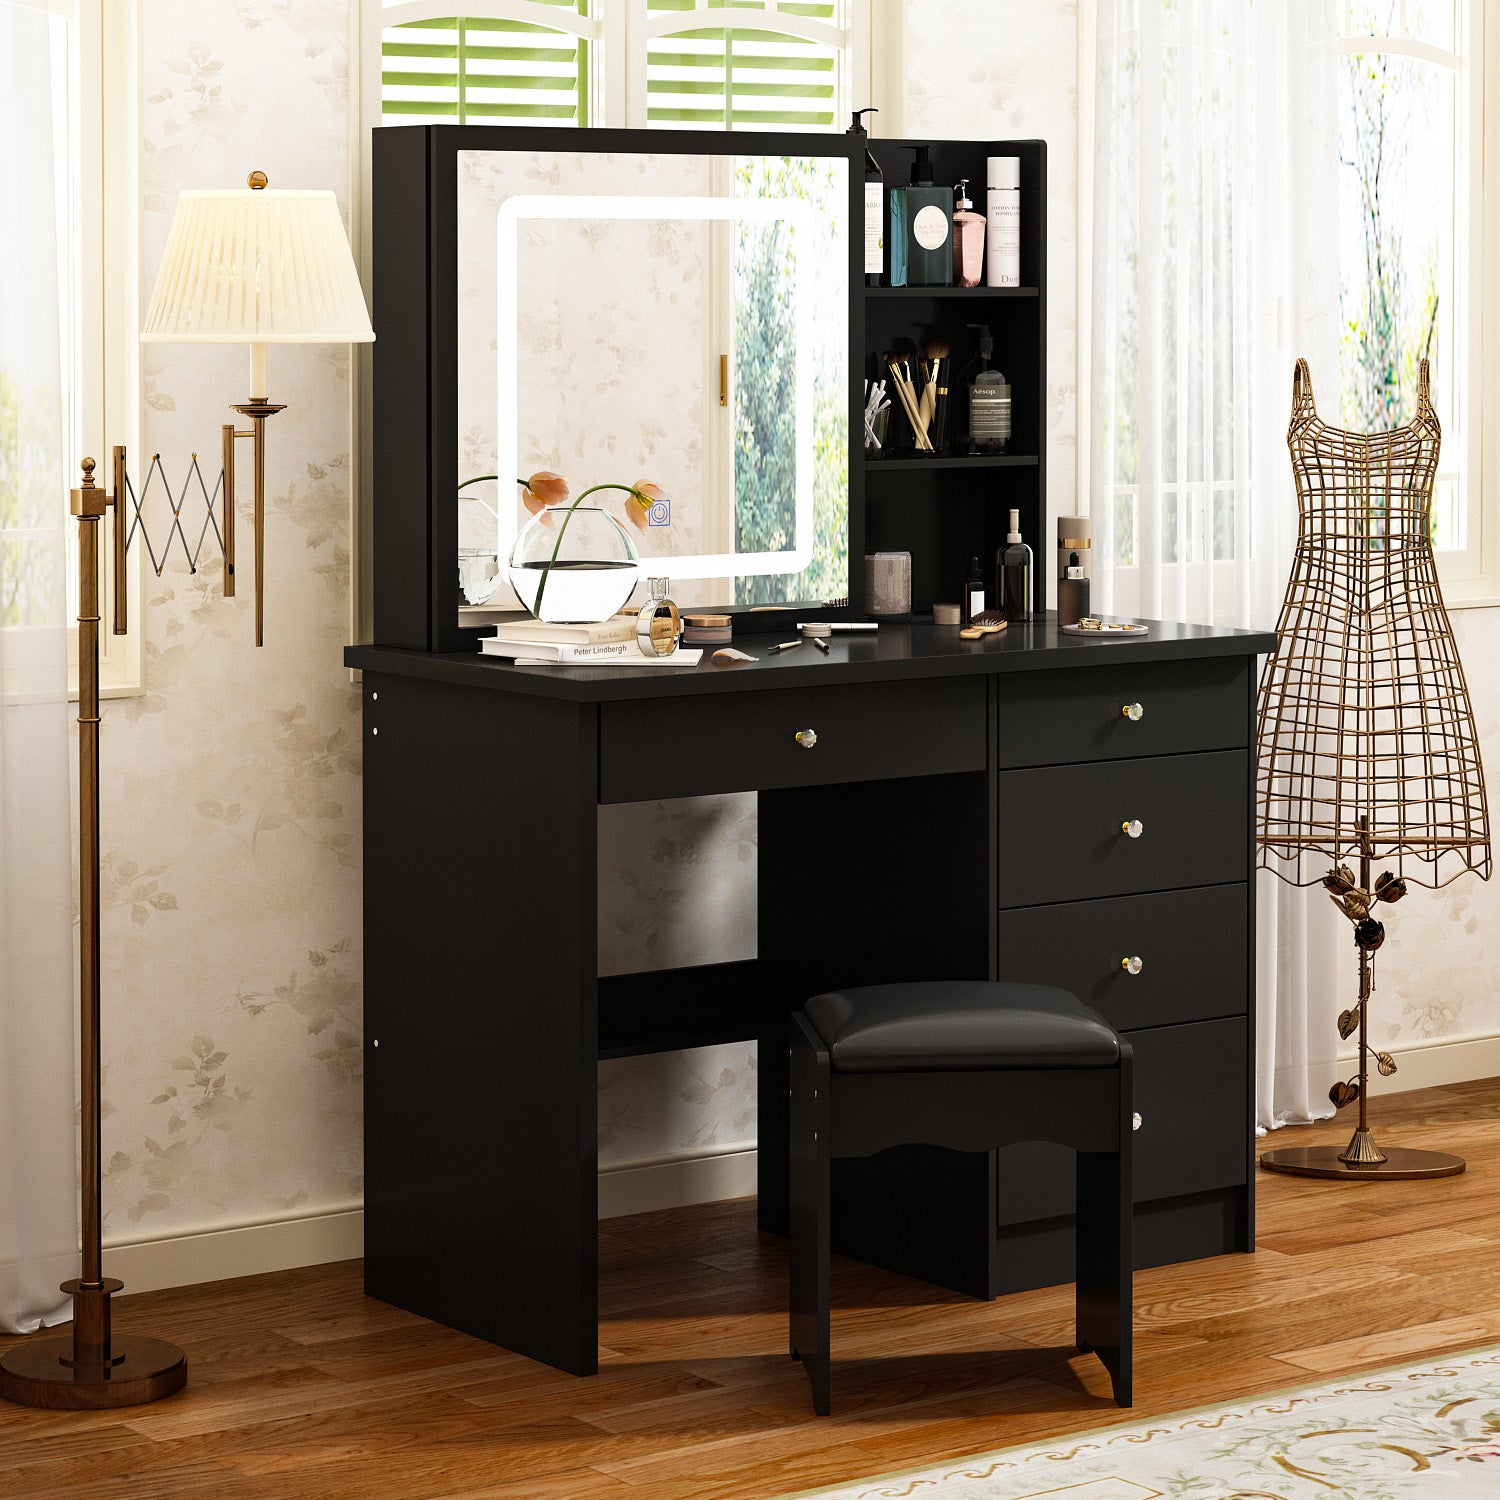 Large Vanity Set Makeup Vanity Dressing Table with Sliding Lighted Mirror 5 Drawers & Shelves